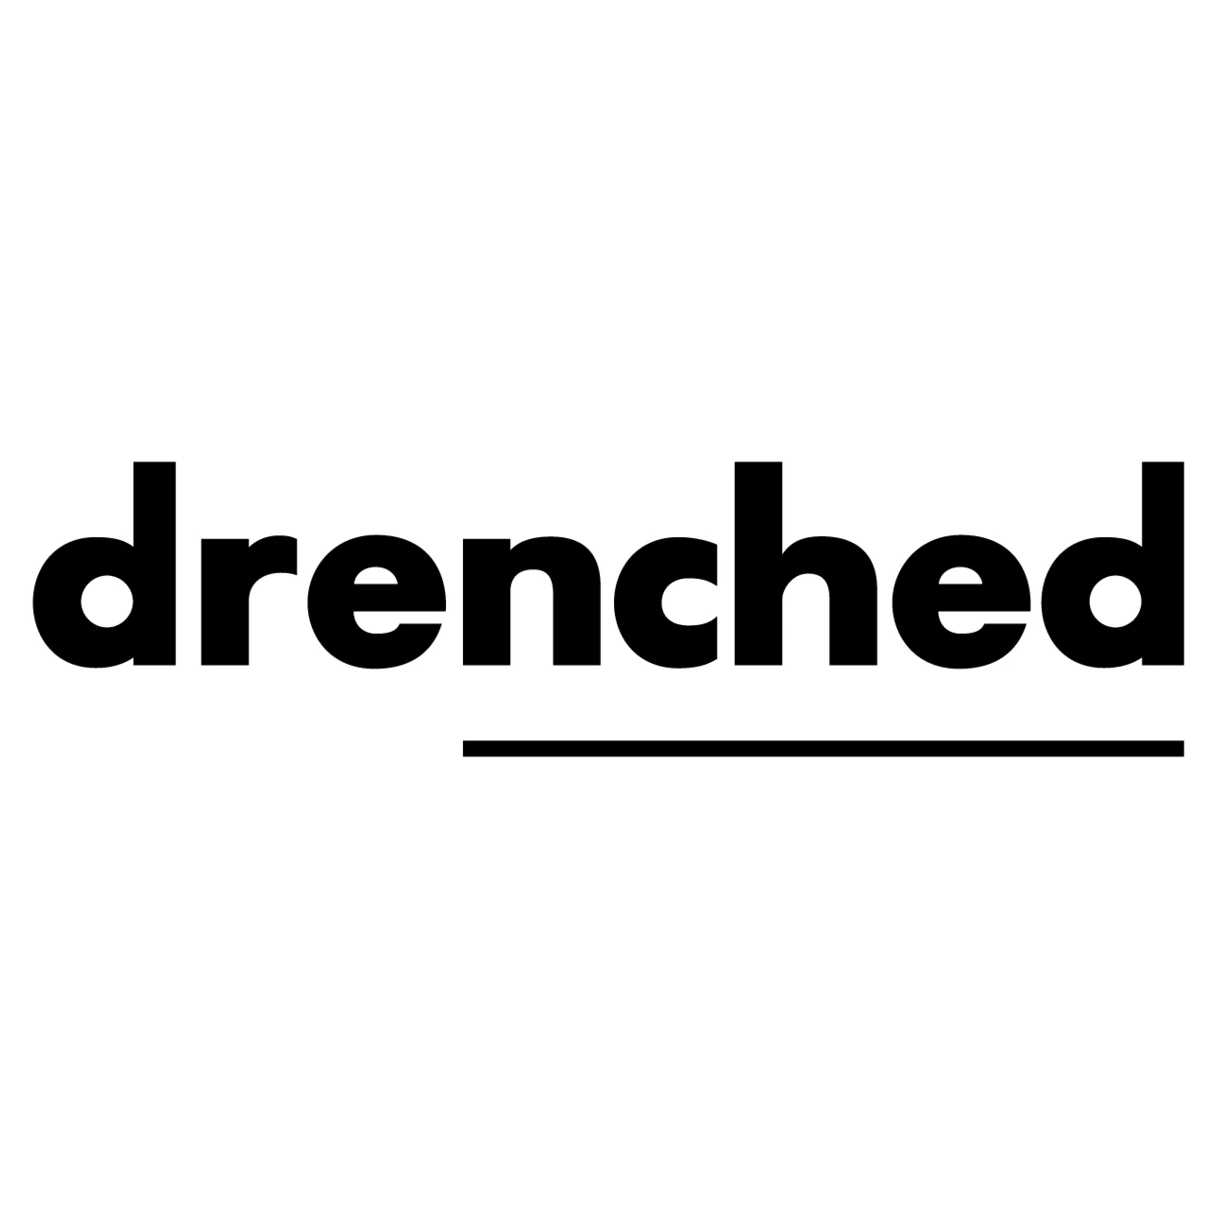 drenched brand logo